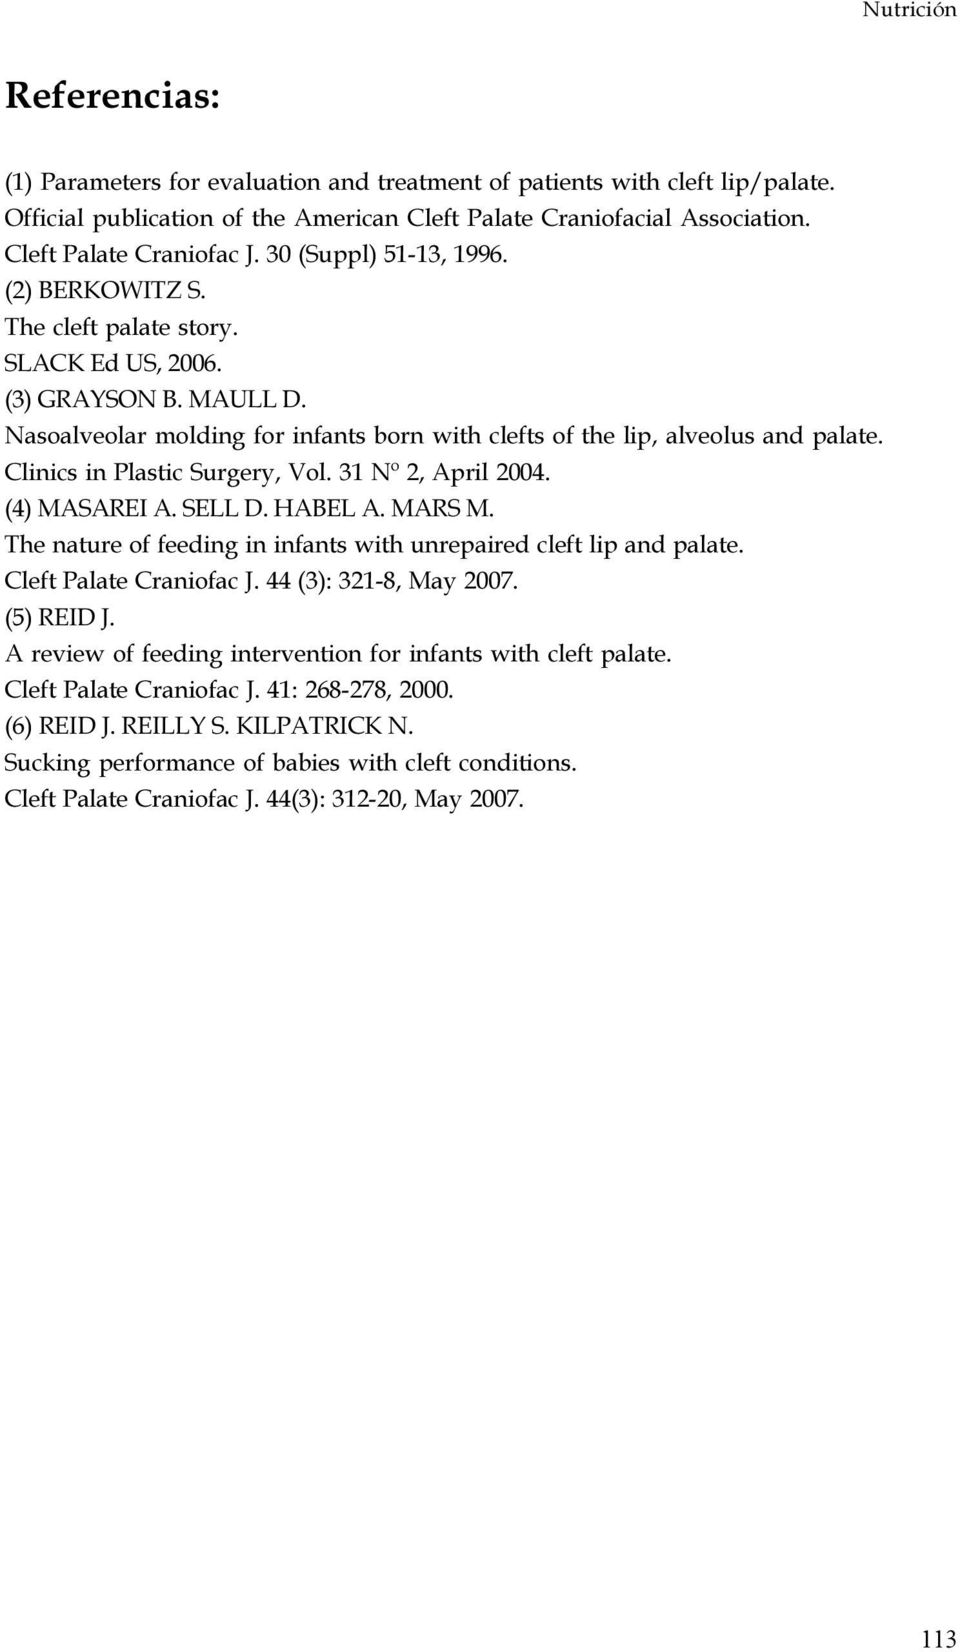 Clinics in Plastic Surgery, Vol. 31 Nº 2, April 2004. (4) MASAREI A. SELL D. HABEL A. MARS M. The nature of feeding in infants with unrepaired cleft lip and palate. Cleft Palate Craniofac J.